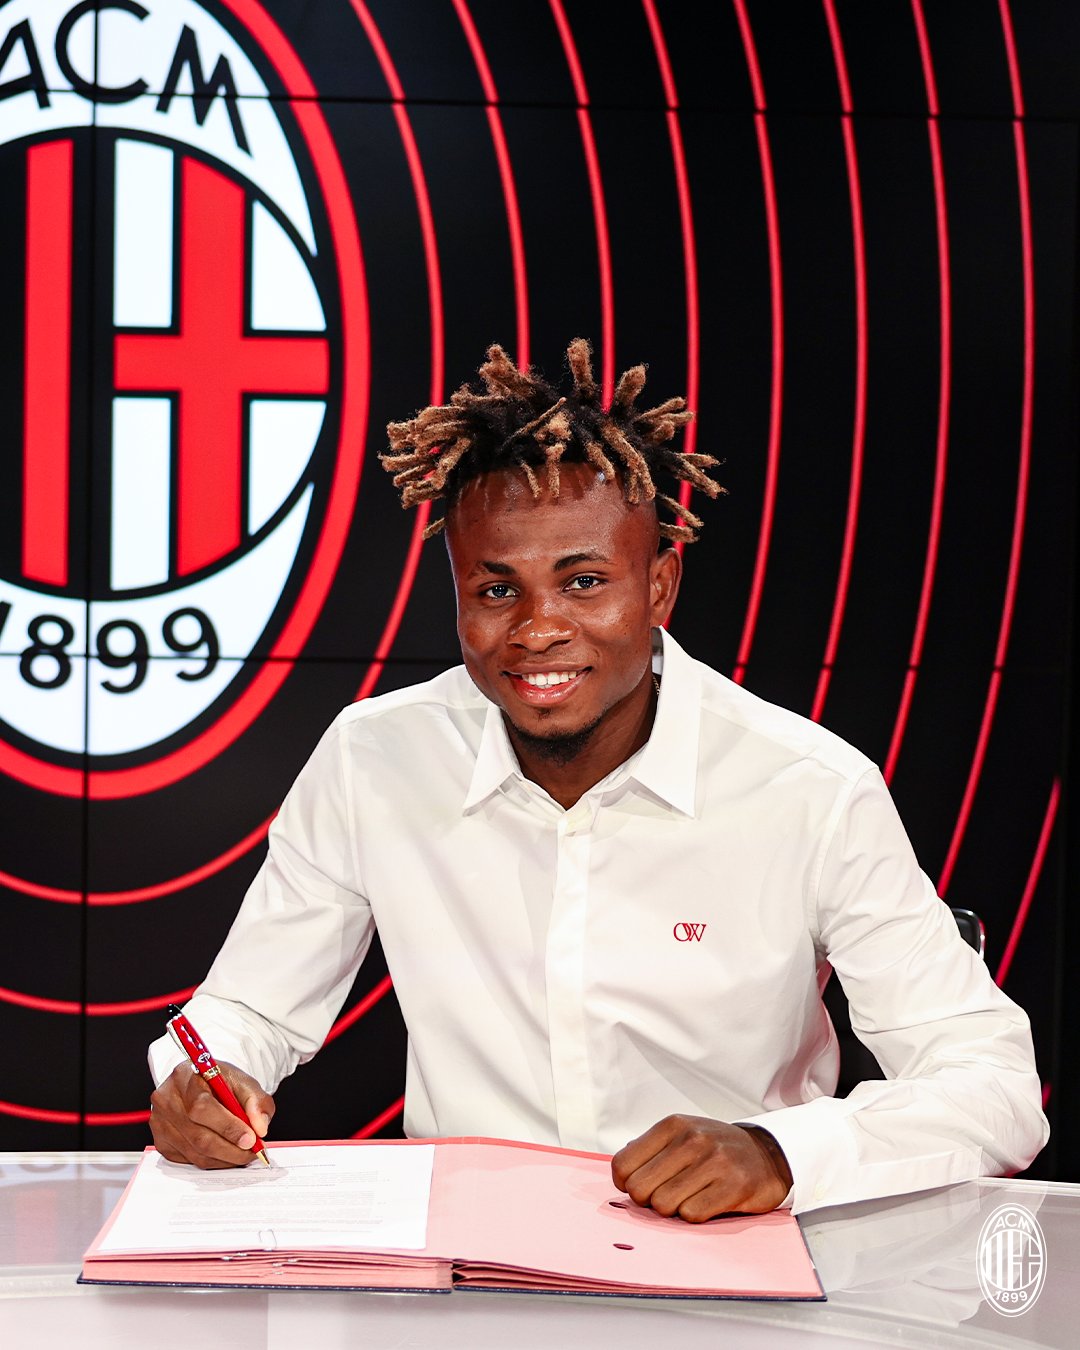 AC Milan confirm signing of Super Eagles winger Samuel Chukwueze on deal until 2028